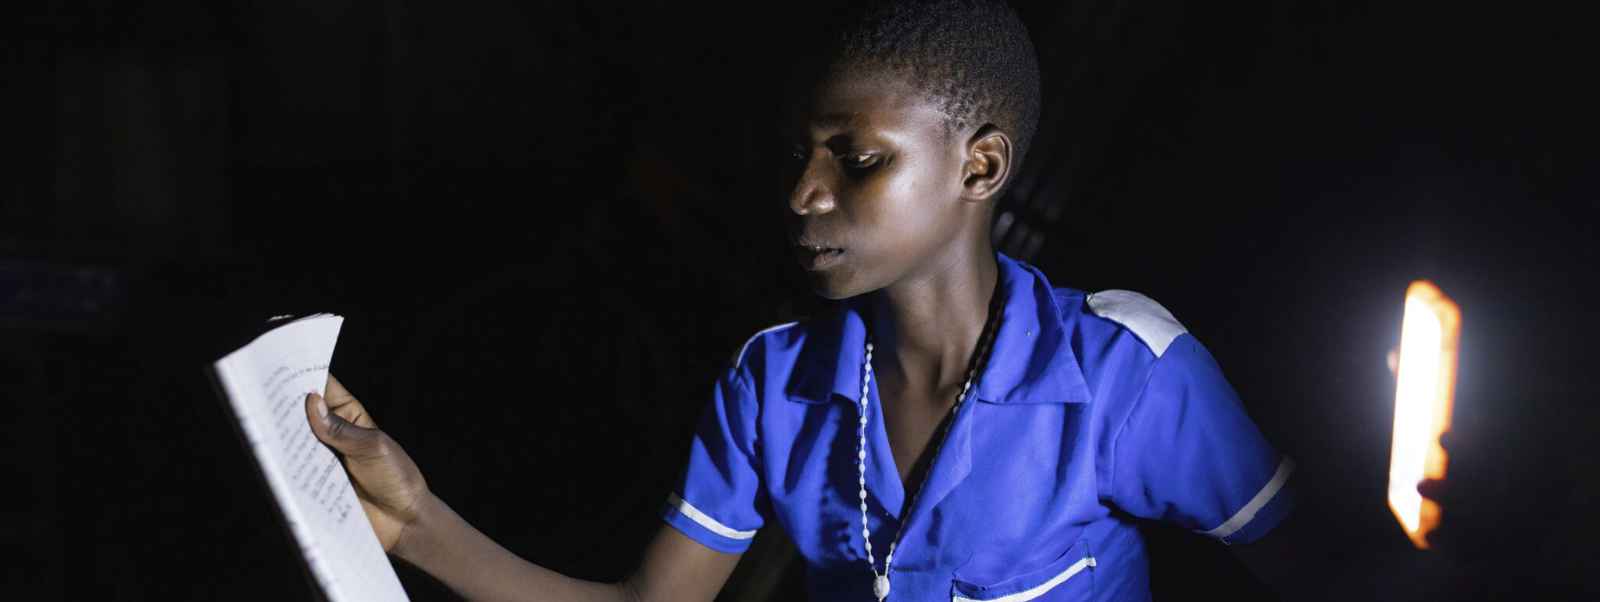 Ntandamula pupil studying after nightfall thanks to the EASE project